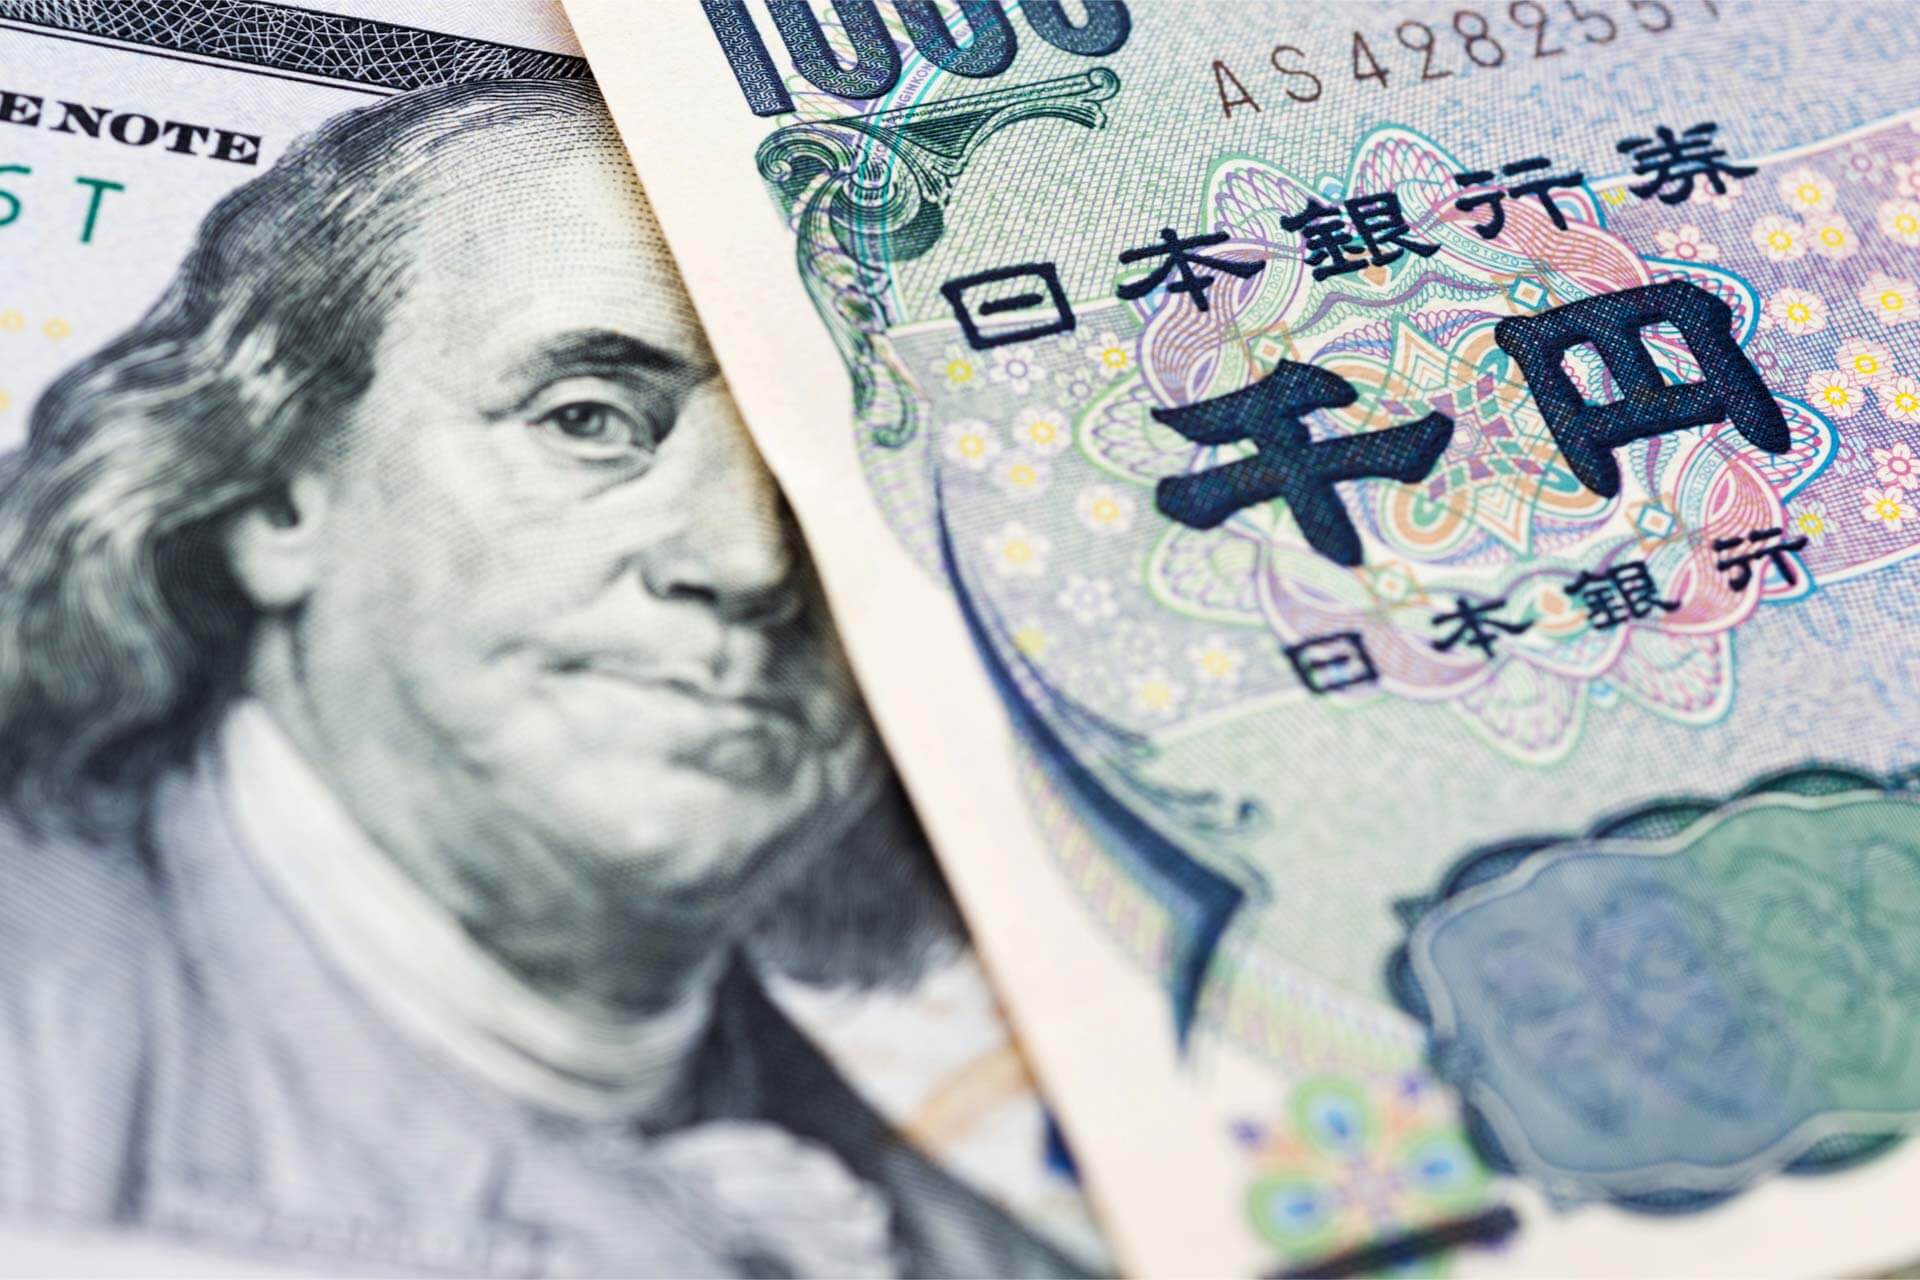 FX Update: The JPY should be getting more love here